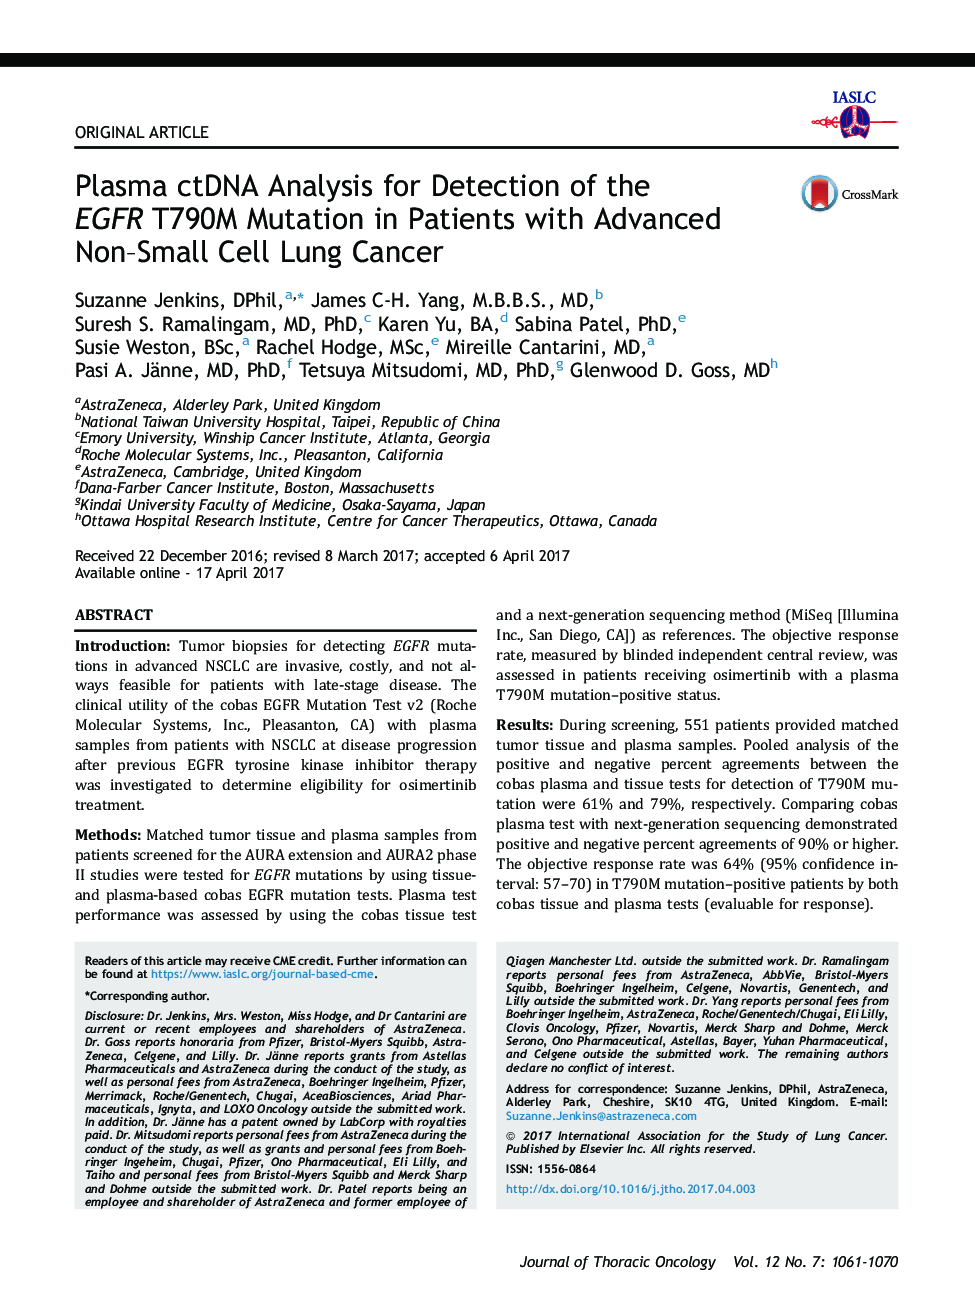 Plasma ctDNA Analysis for Detection of the EGFRÂ T790M Mutation in Patients with Advanced Non-SmallÂ Cell Lung Cancer